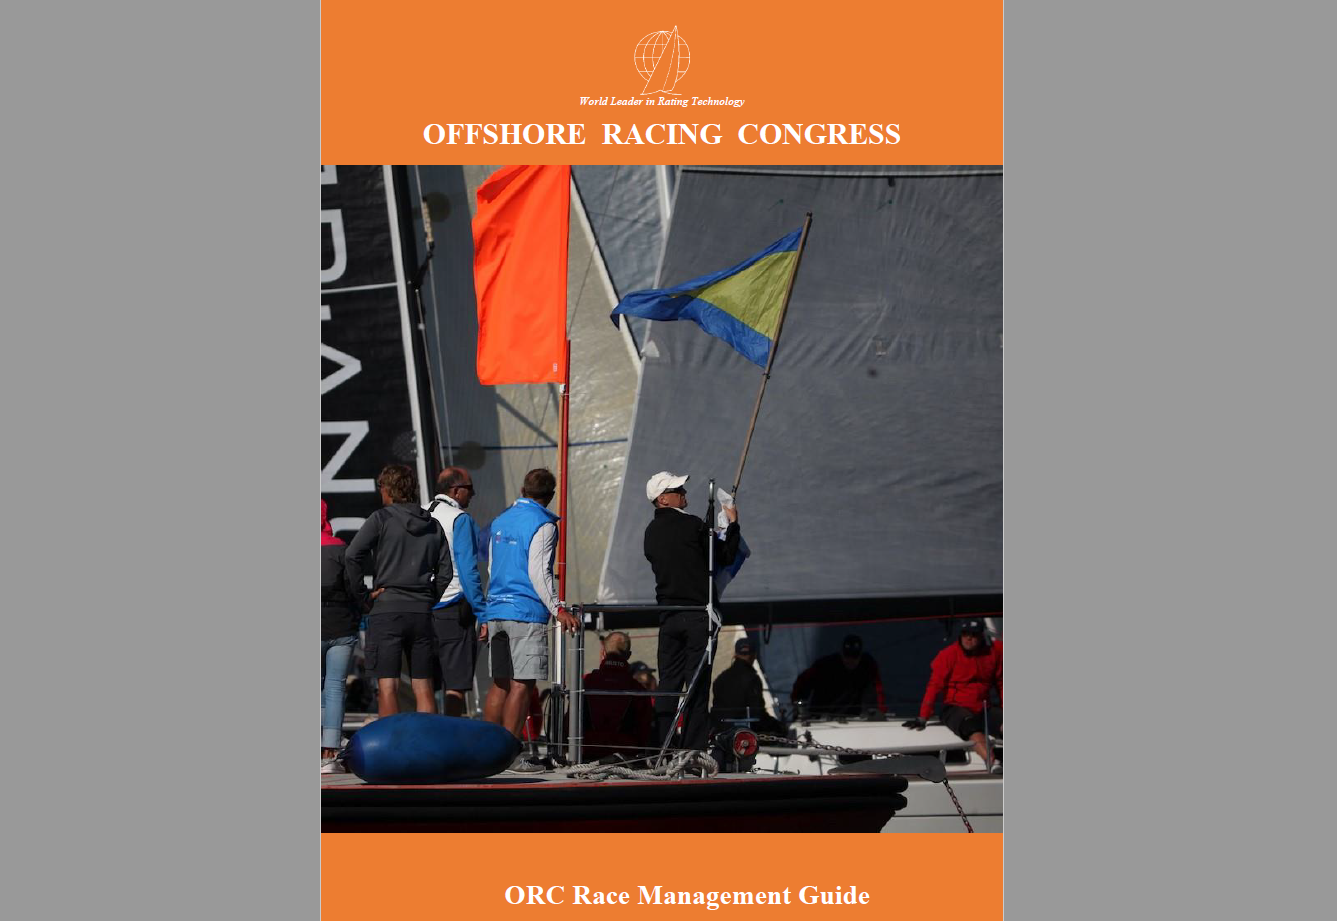 The inaugural edition of the ORC Race Management Guide available